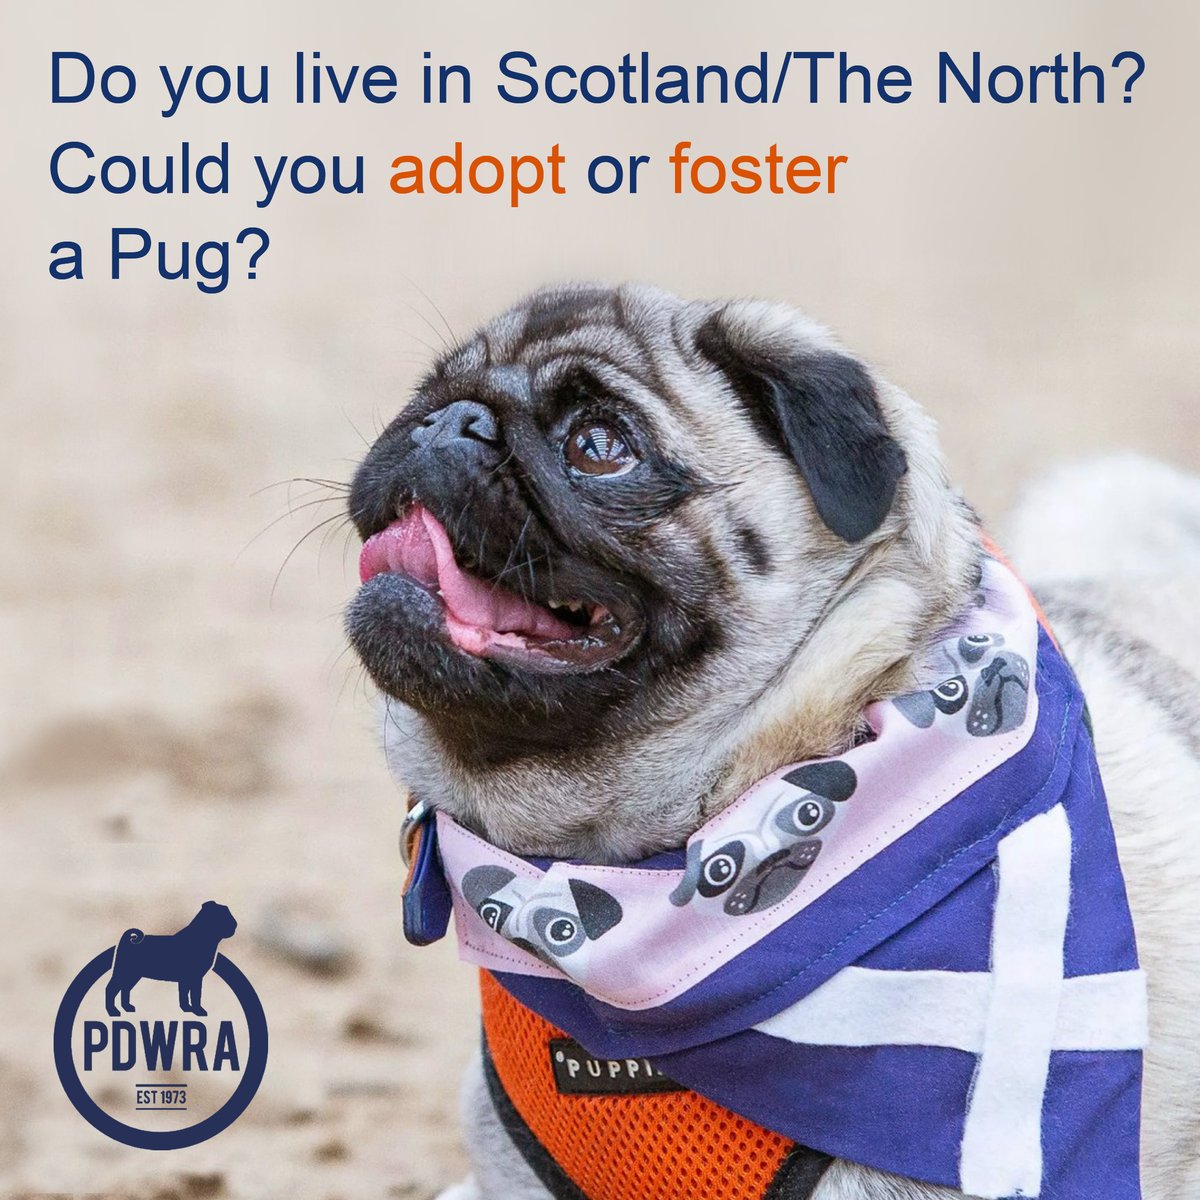 We’re always in need of more adoptive and foster homes across the country, particularly in Scotland and The North of England. If you think you might be able to help, just click here - ecs.page.link/L6BX4 #pdwra #pugcharity #pugwelfare #friendsofwelfare #pugadoption #pug